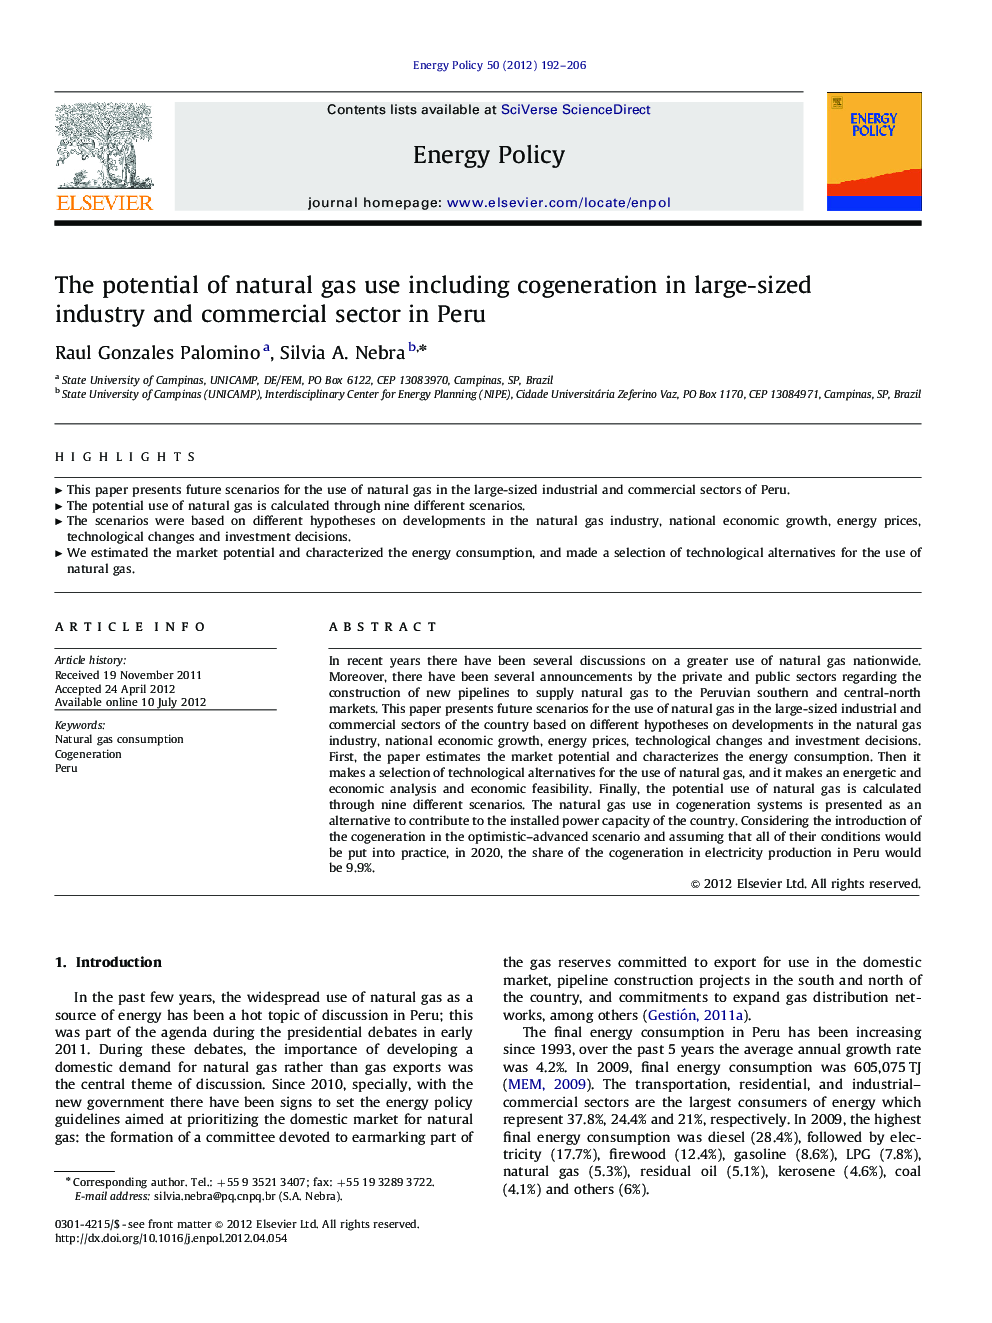 The potential of natural gas use including cogeneration in large-sized industry and commercial sector in Peru